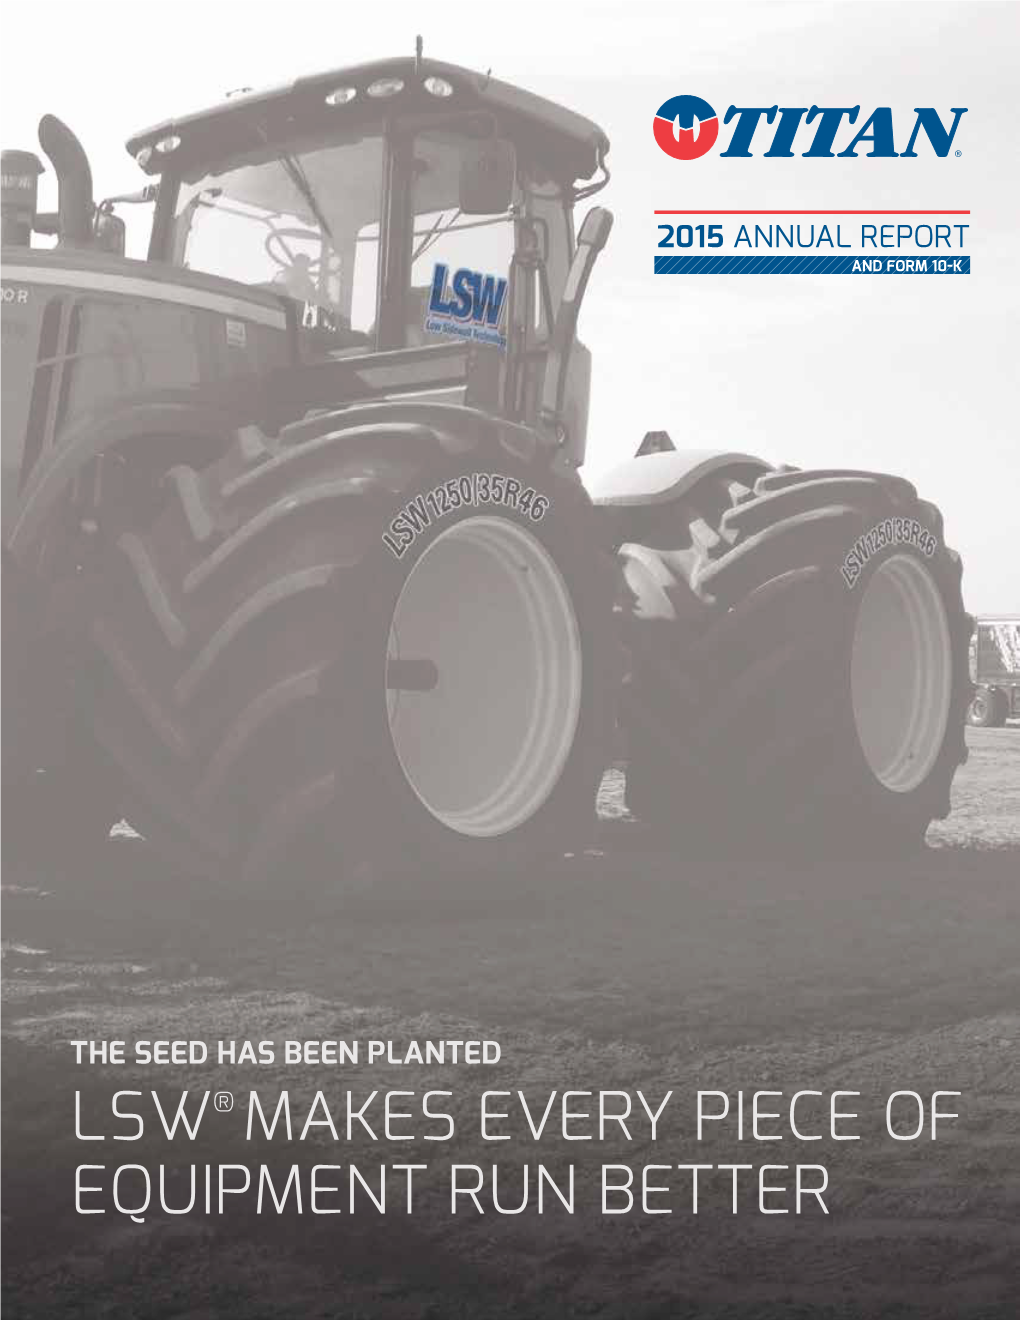 Lsw® Makes Every Piece of Equipment Run Better to the Shareholders of Titan International, Inc